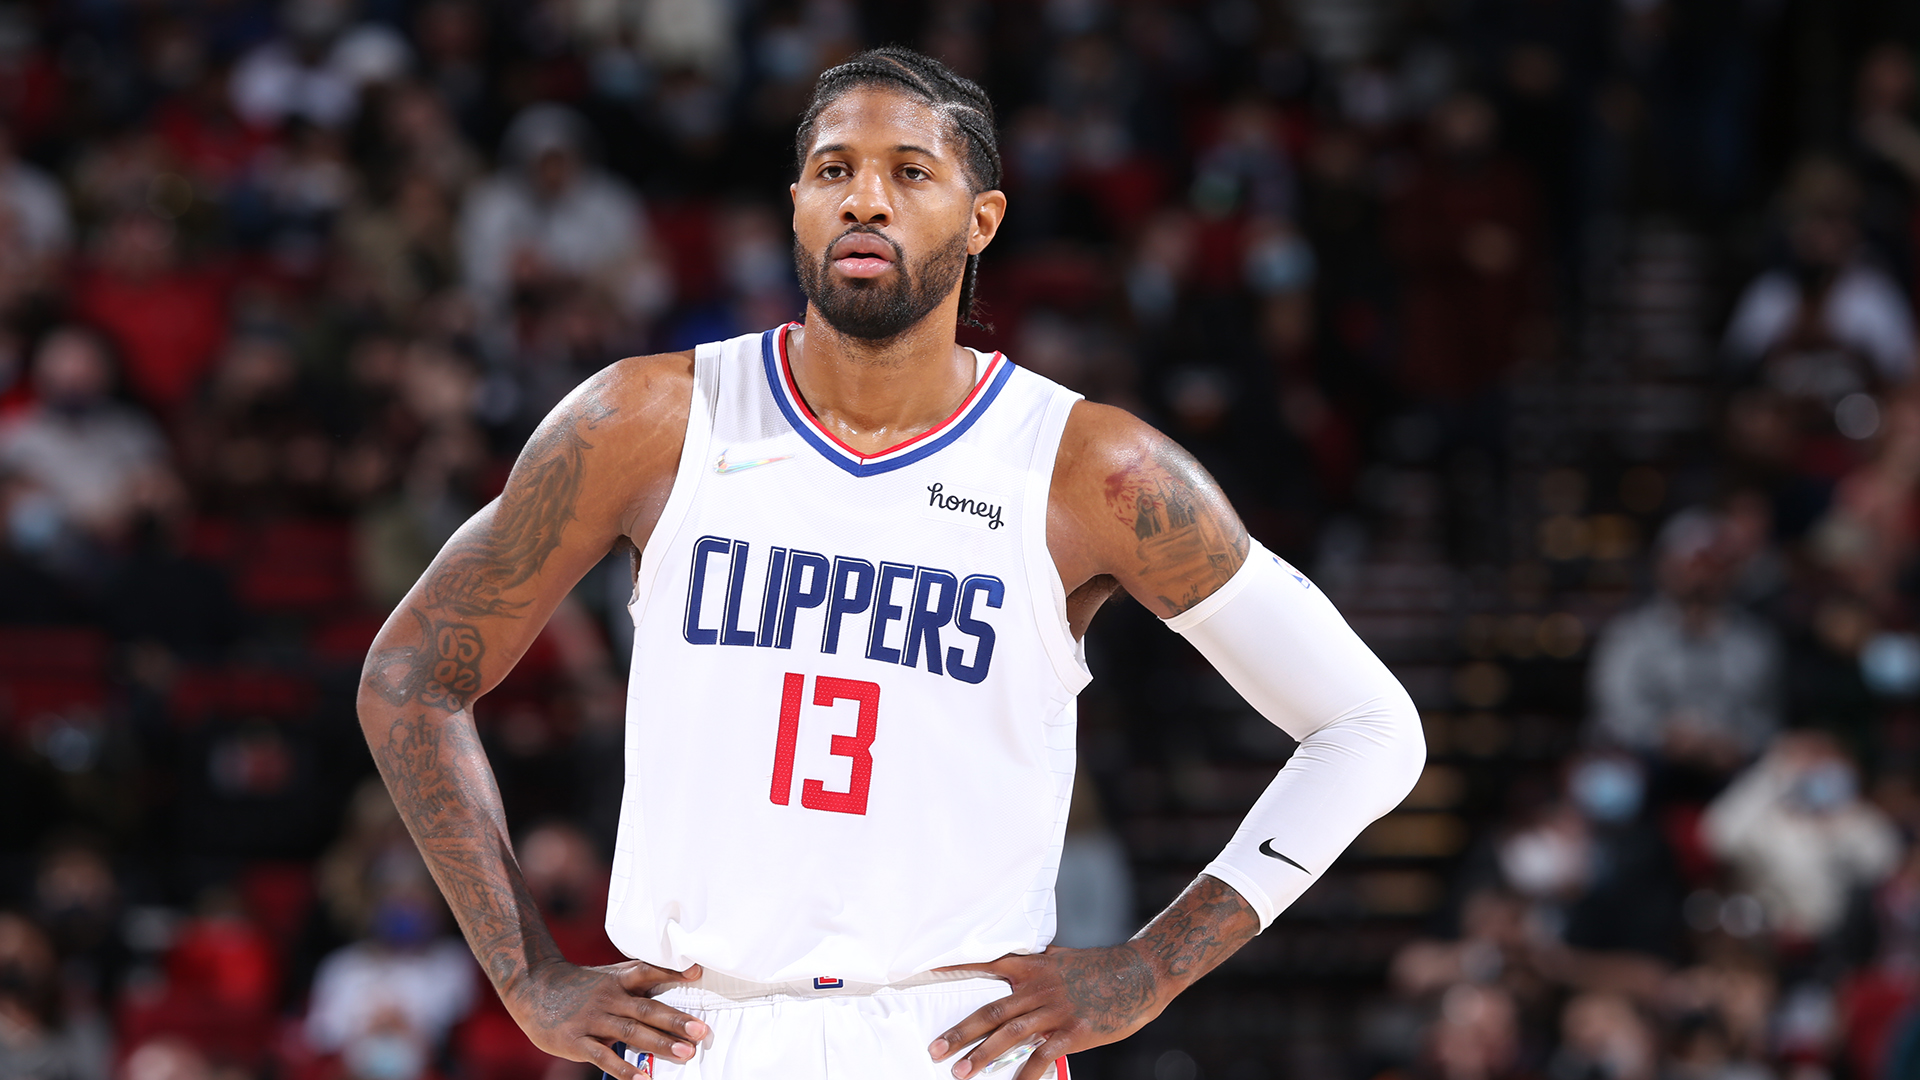 Paul George leads the Clippers to a 25-points comeback win against the Jazz